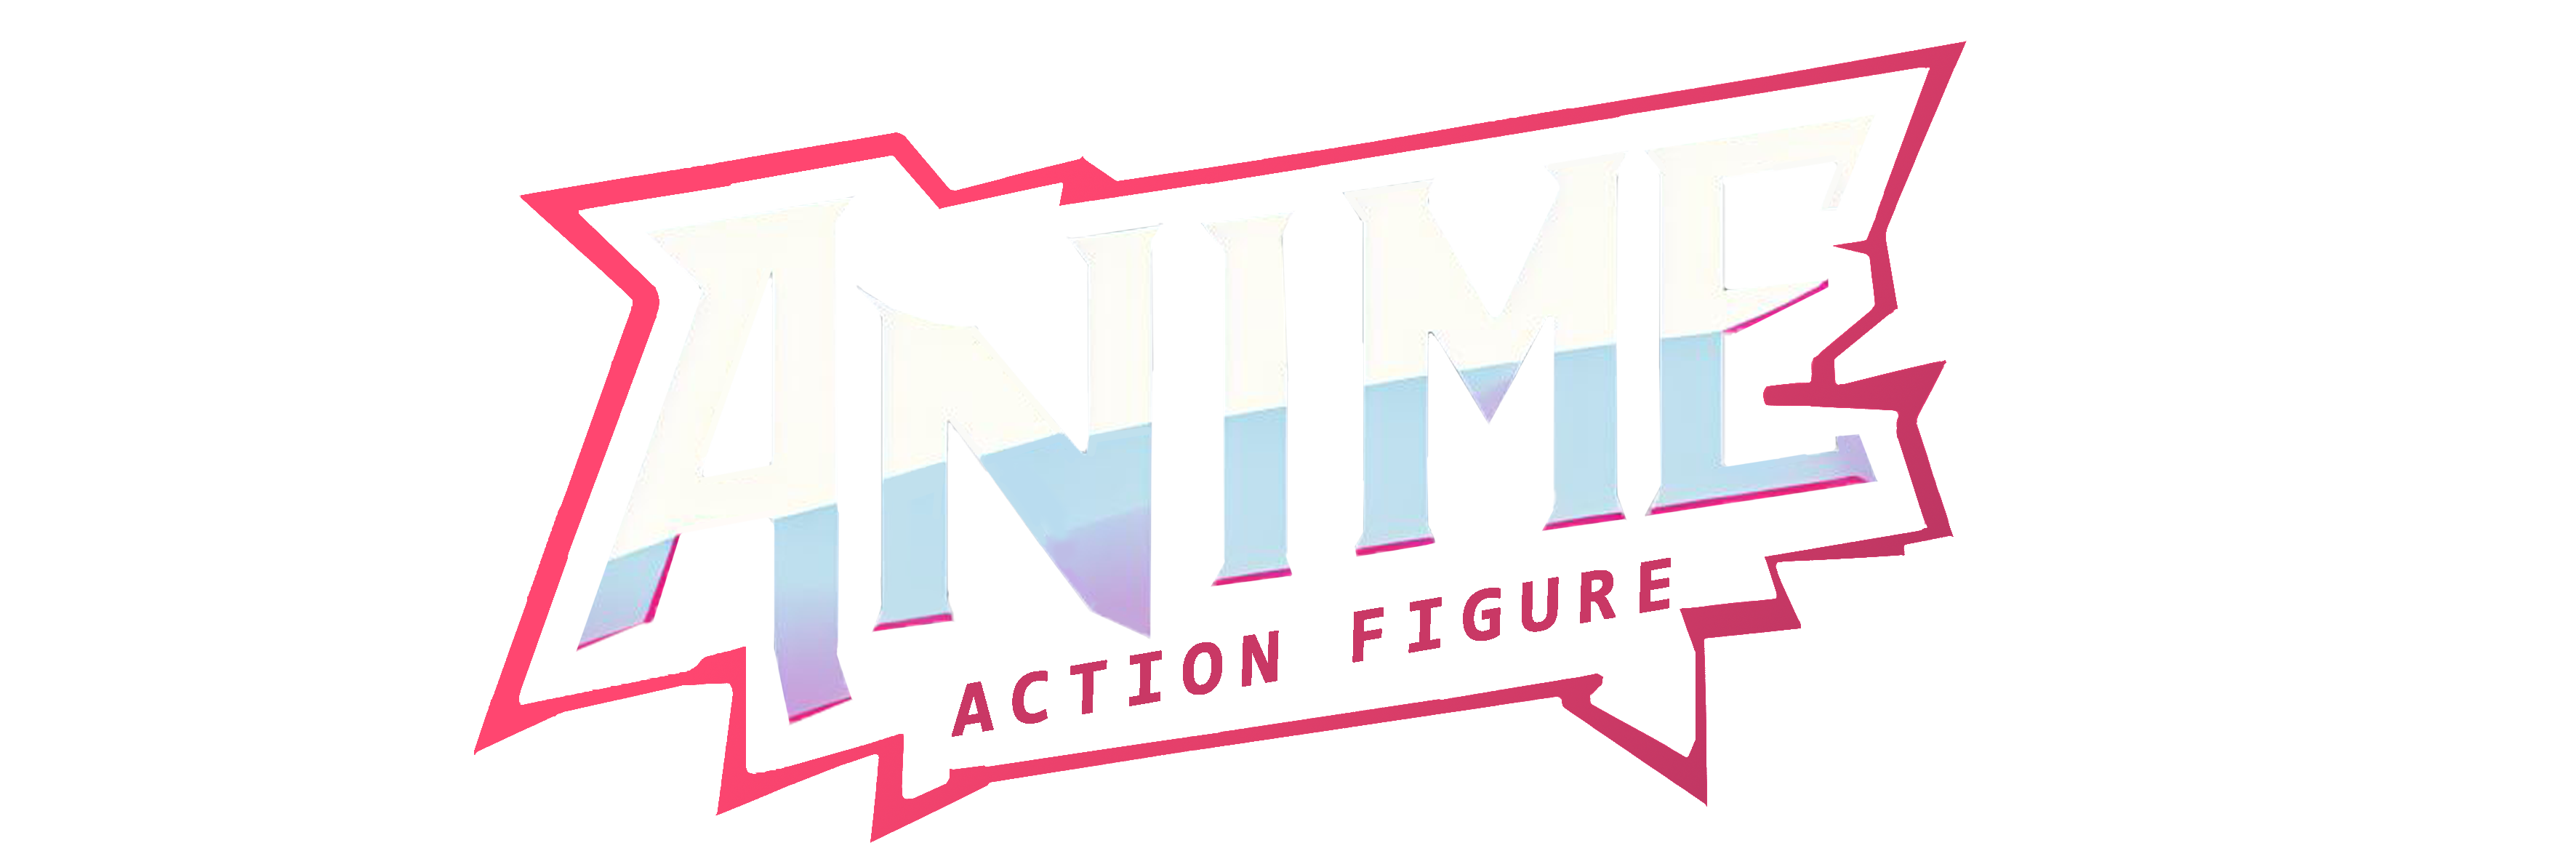 Anime Action Figure Official site